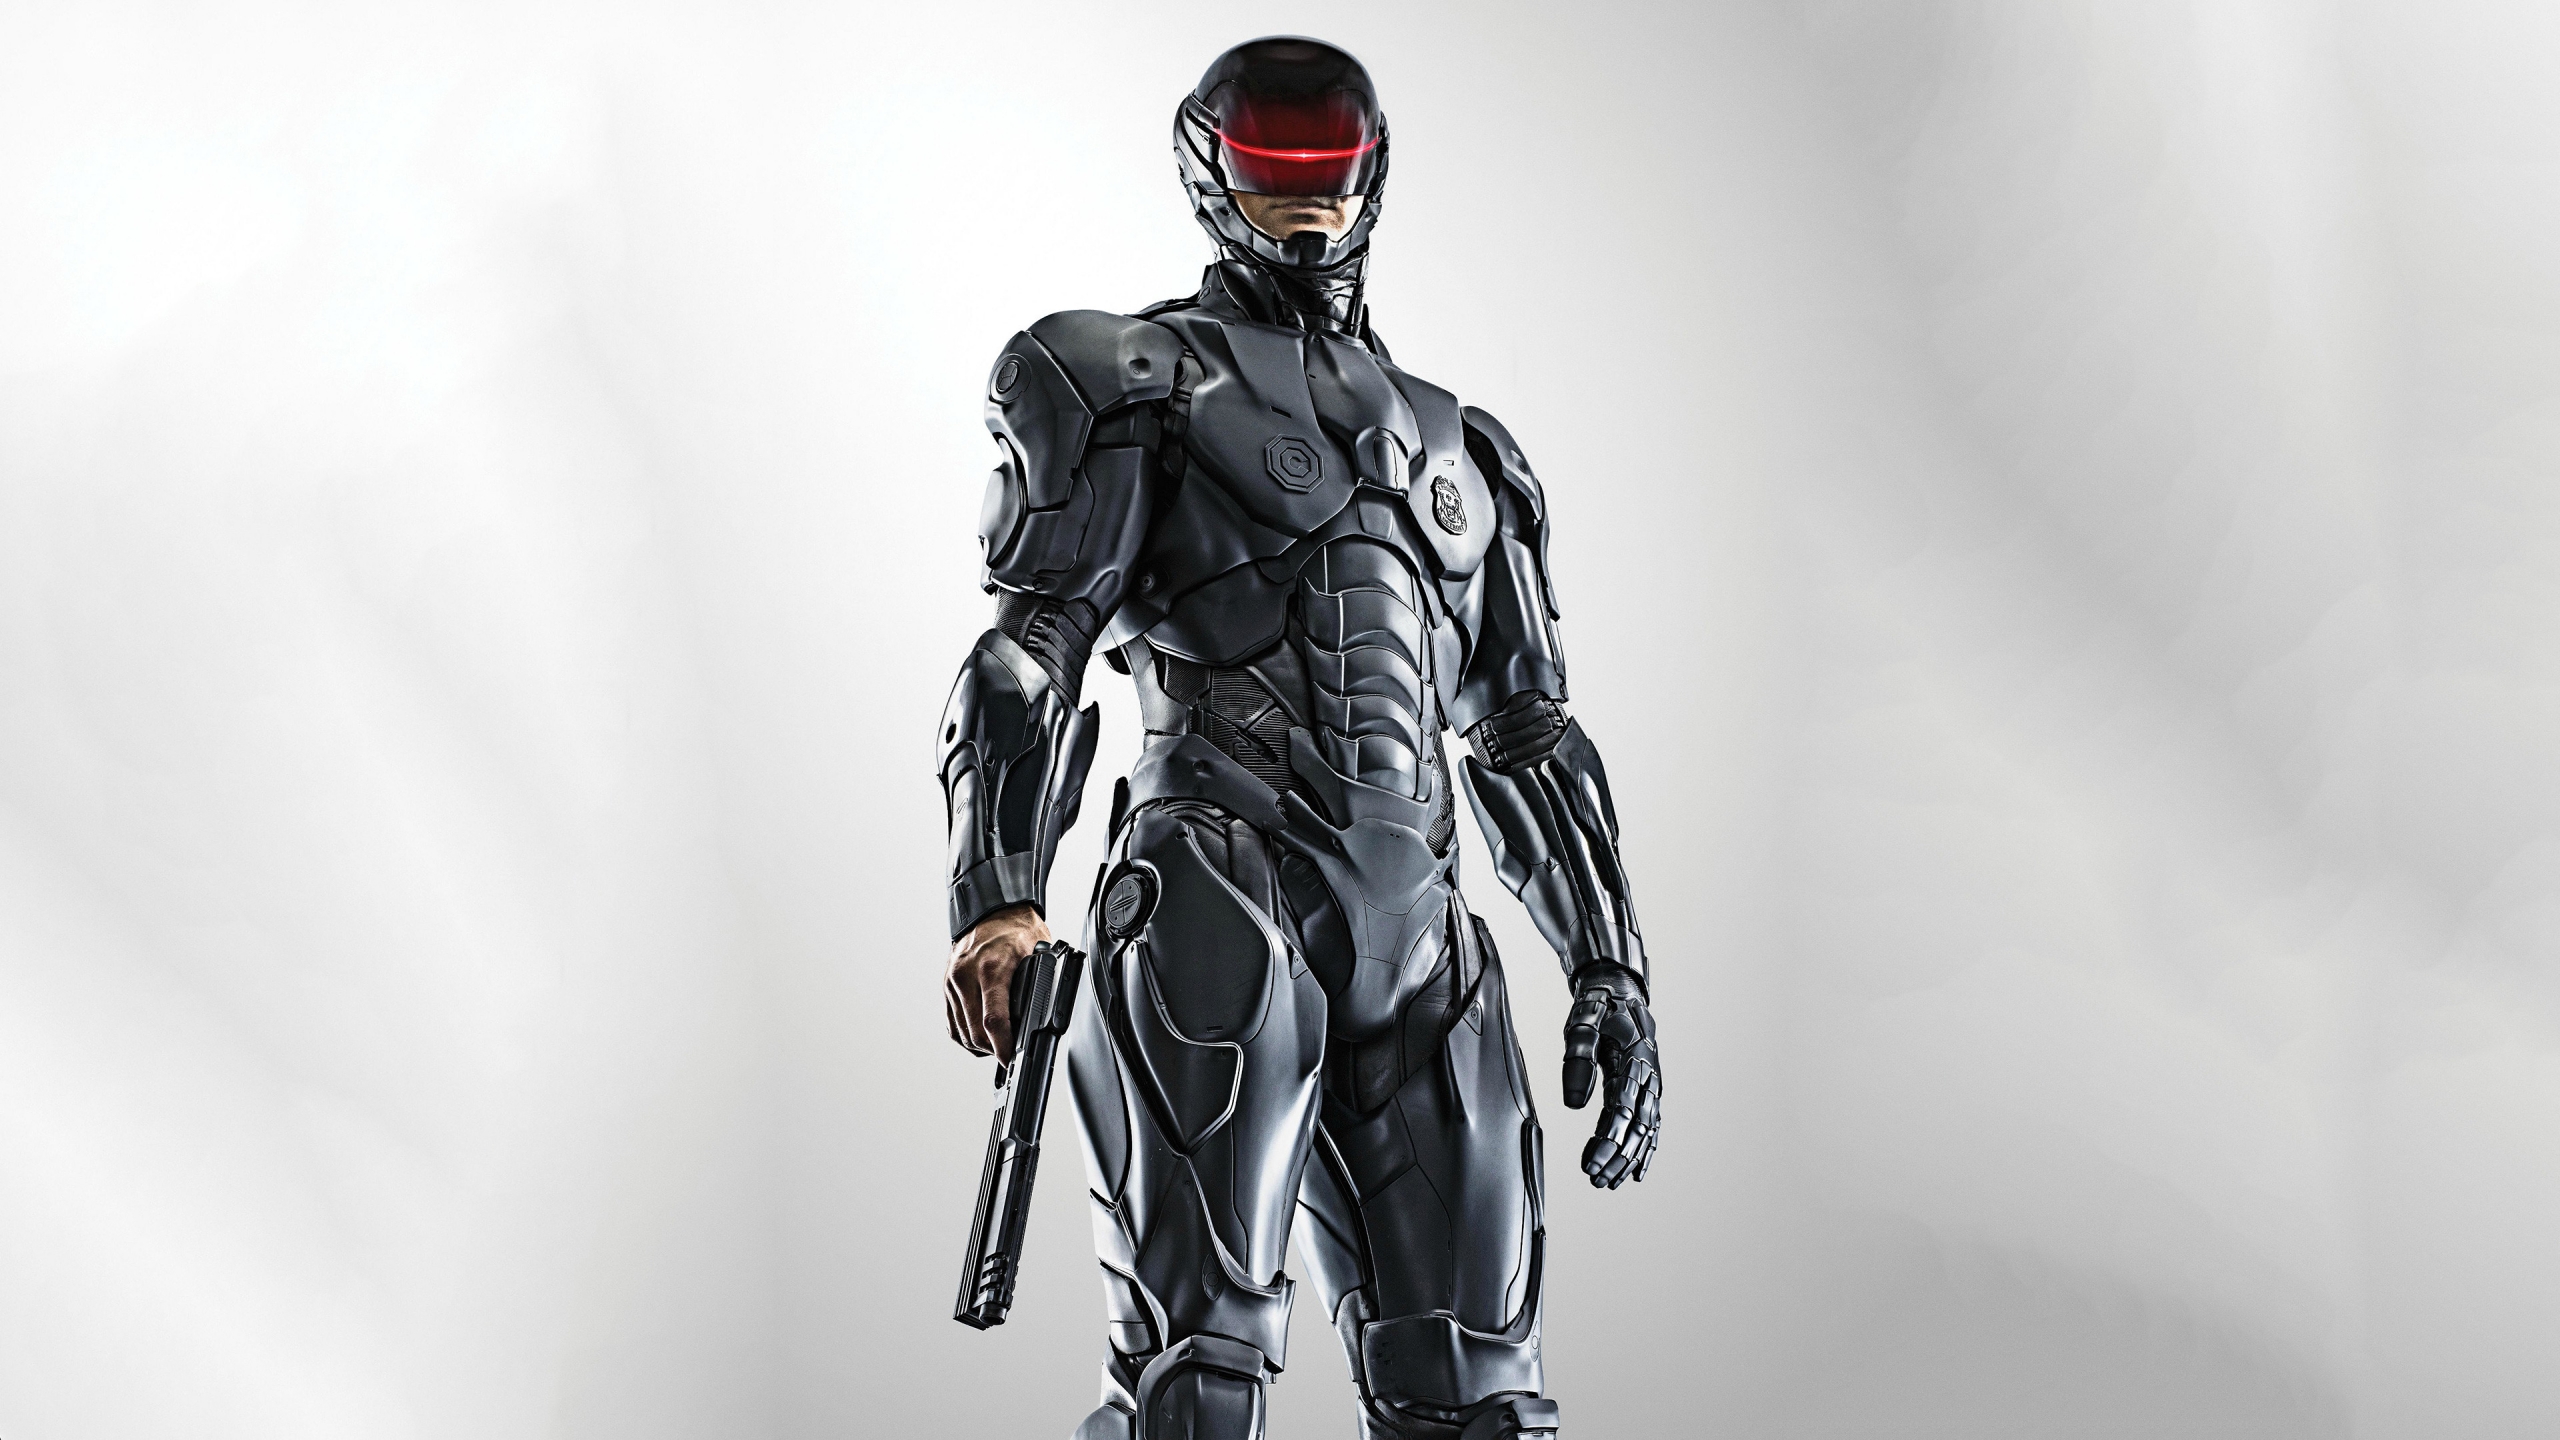 Robocop 2014 Poster for 2560x1440 HDTV resolution